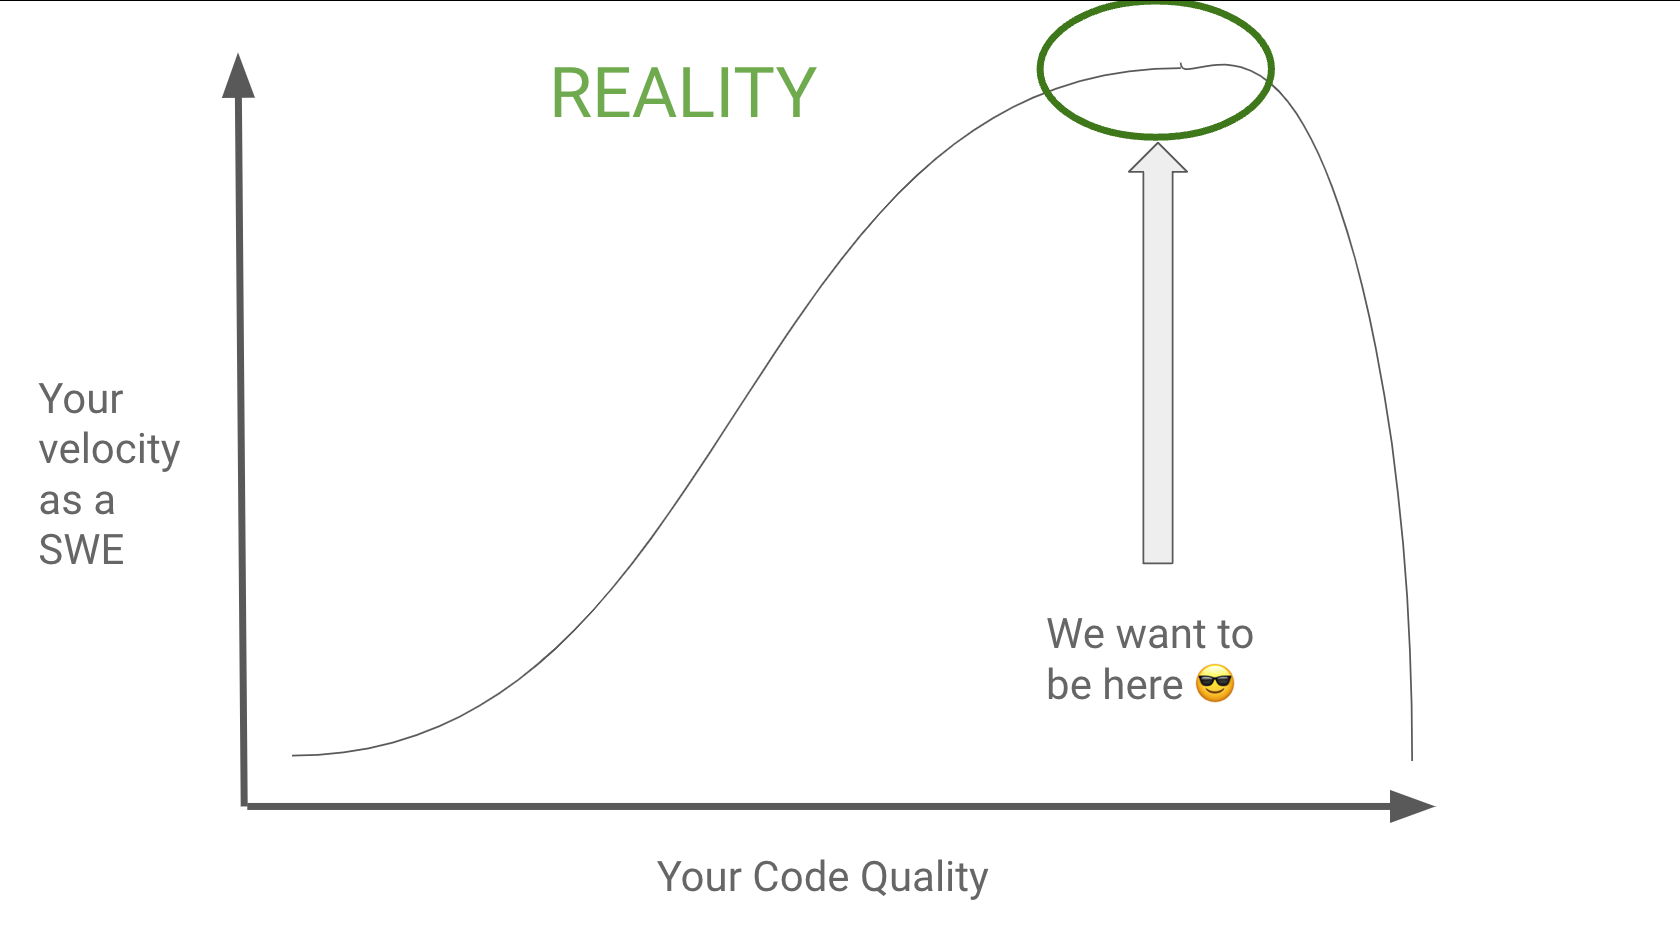 Level Up Your Code Quality As A Software Engineer [Part 3] - The Myth About Better Code